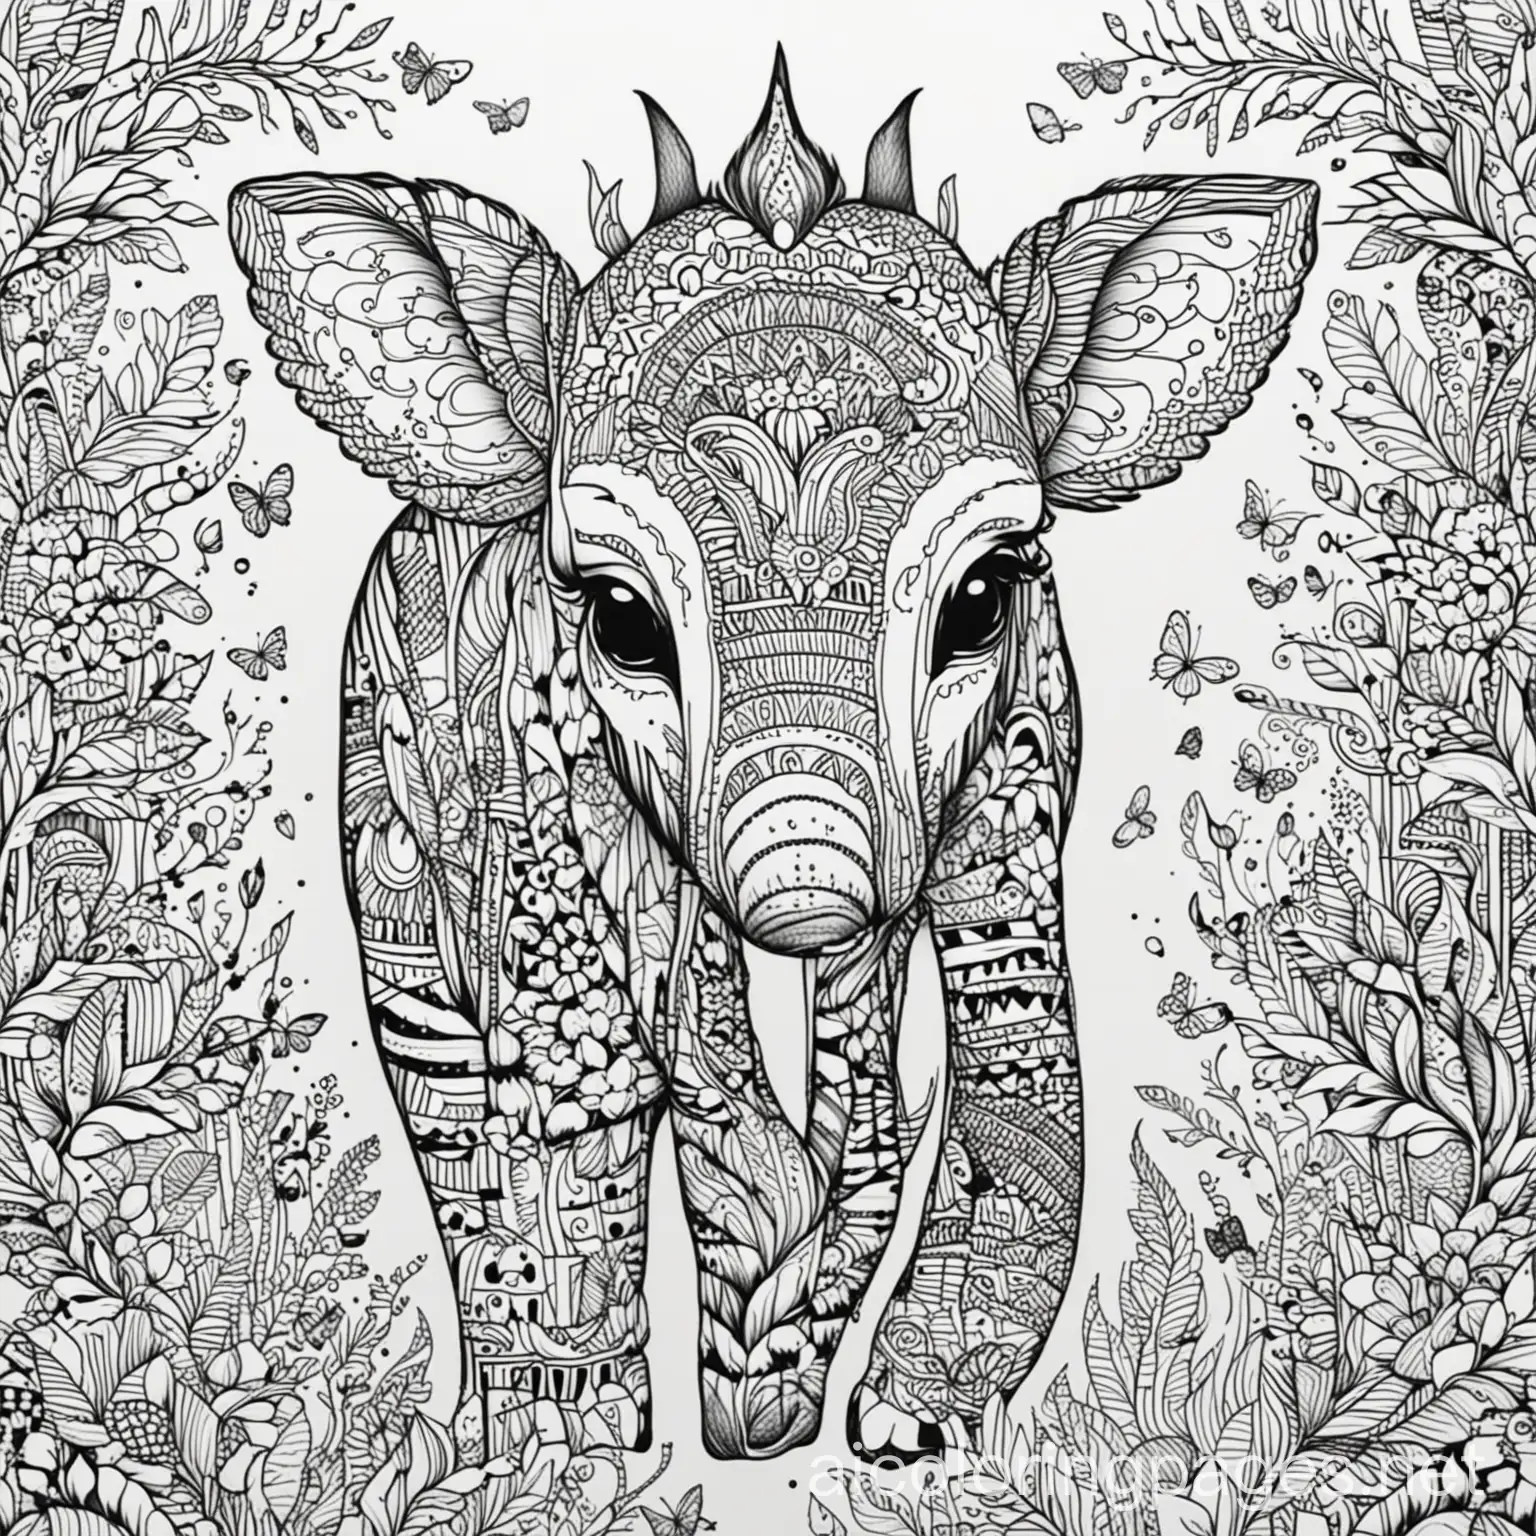 Animal-Coloring-Page-with-Intricate-Patterns-on-White-Background